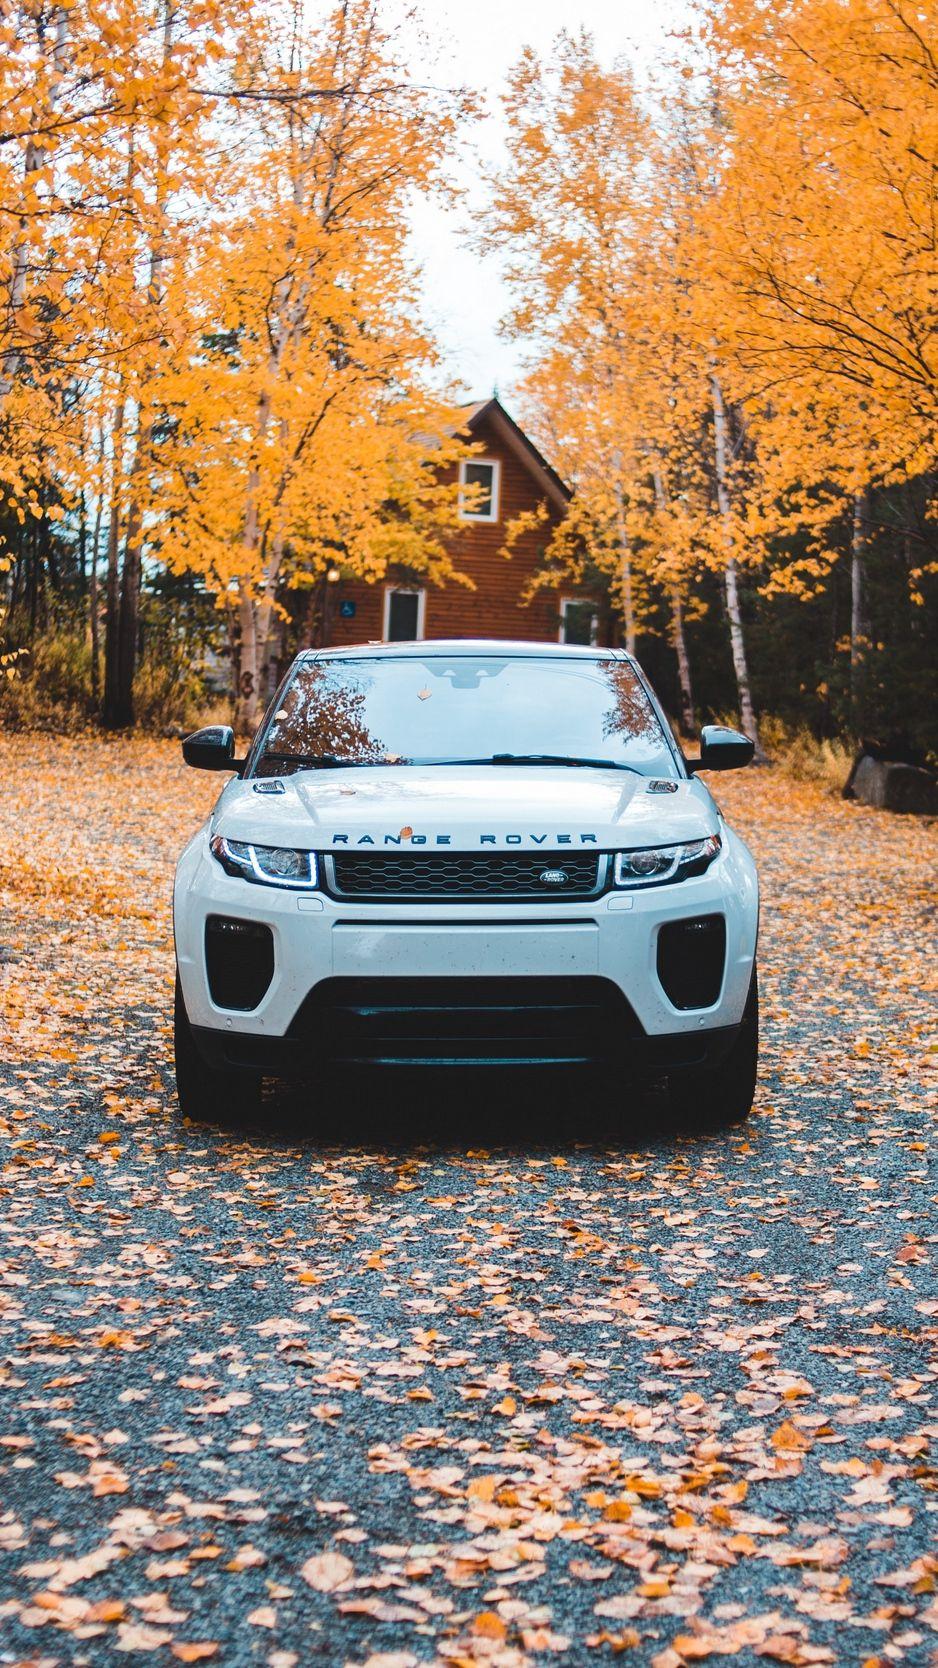 Range Rover Iphone Wallpapers Top Free Range Rover Iphone Backgrounds Wallpaperaccess